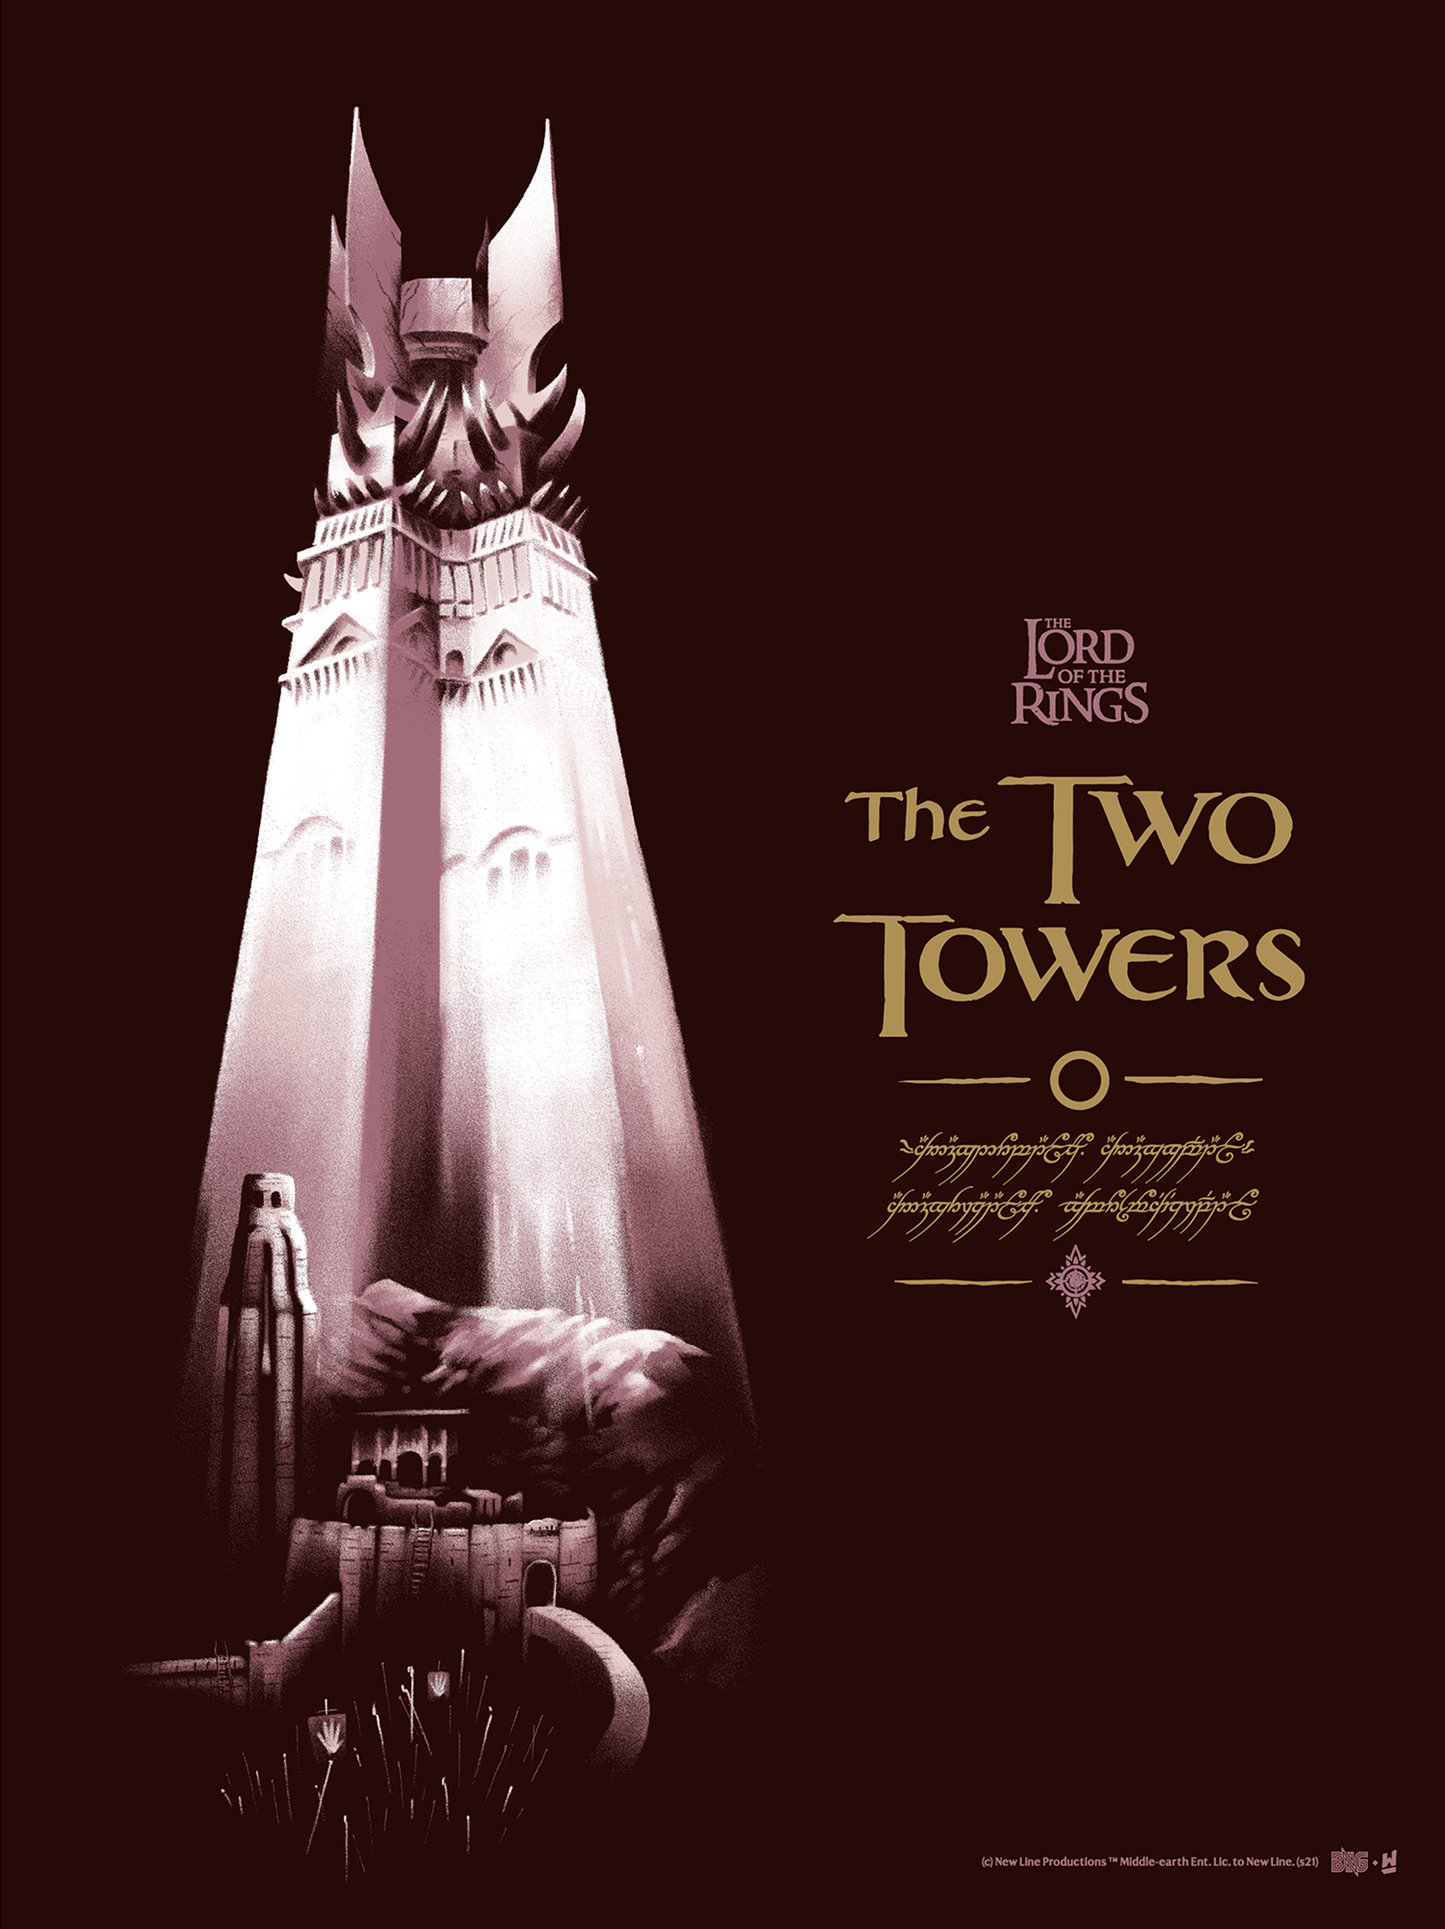 Lyndon Willoughby "The Lord of the Rings: The Two Towers"